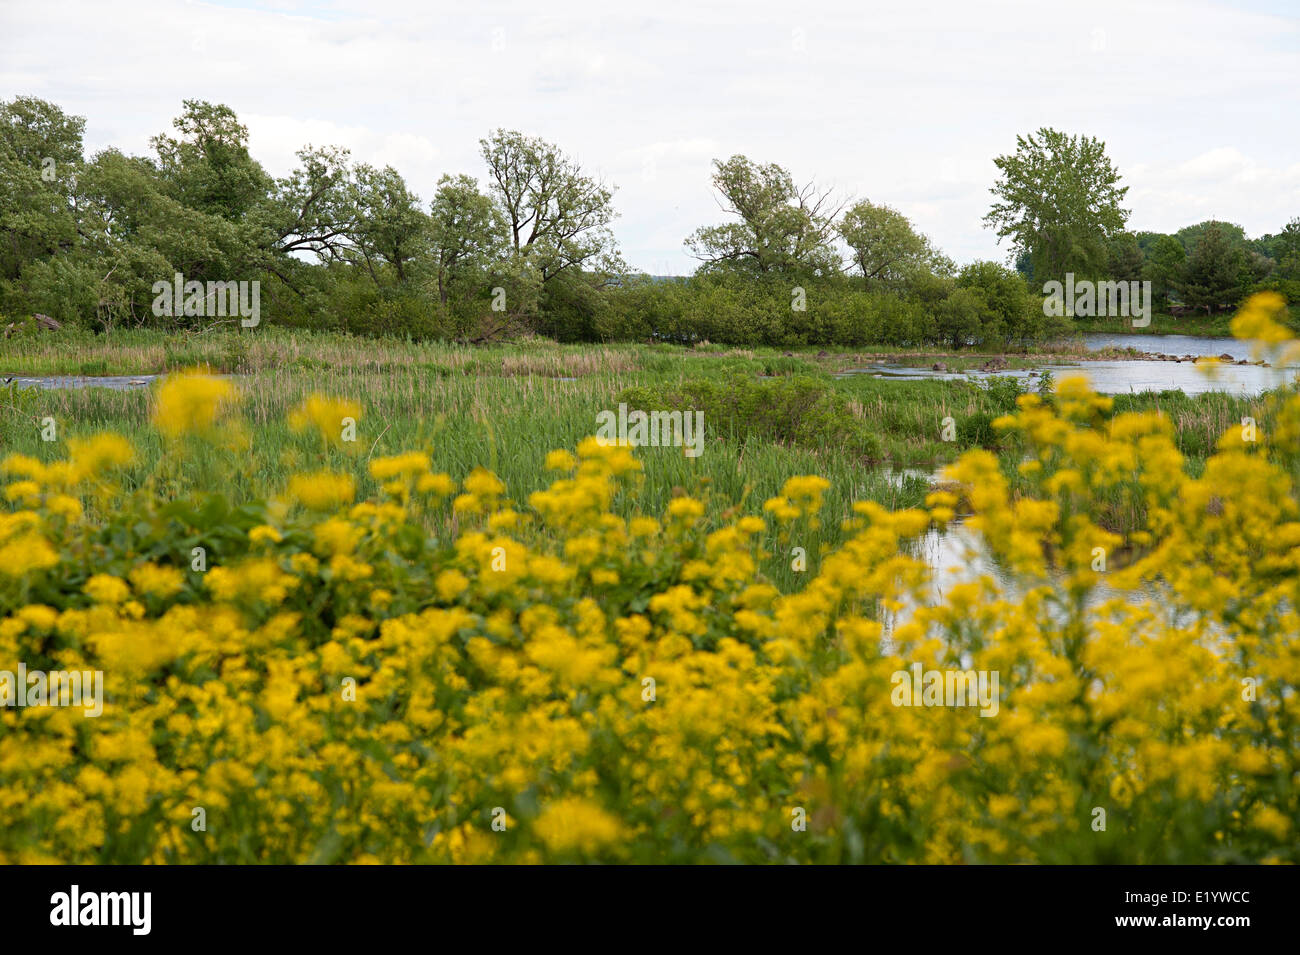 Lachine waterfront with large areas of bright yellow wild parsnip flowers. Montreal, Quebec, Canada. Stock Photo